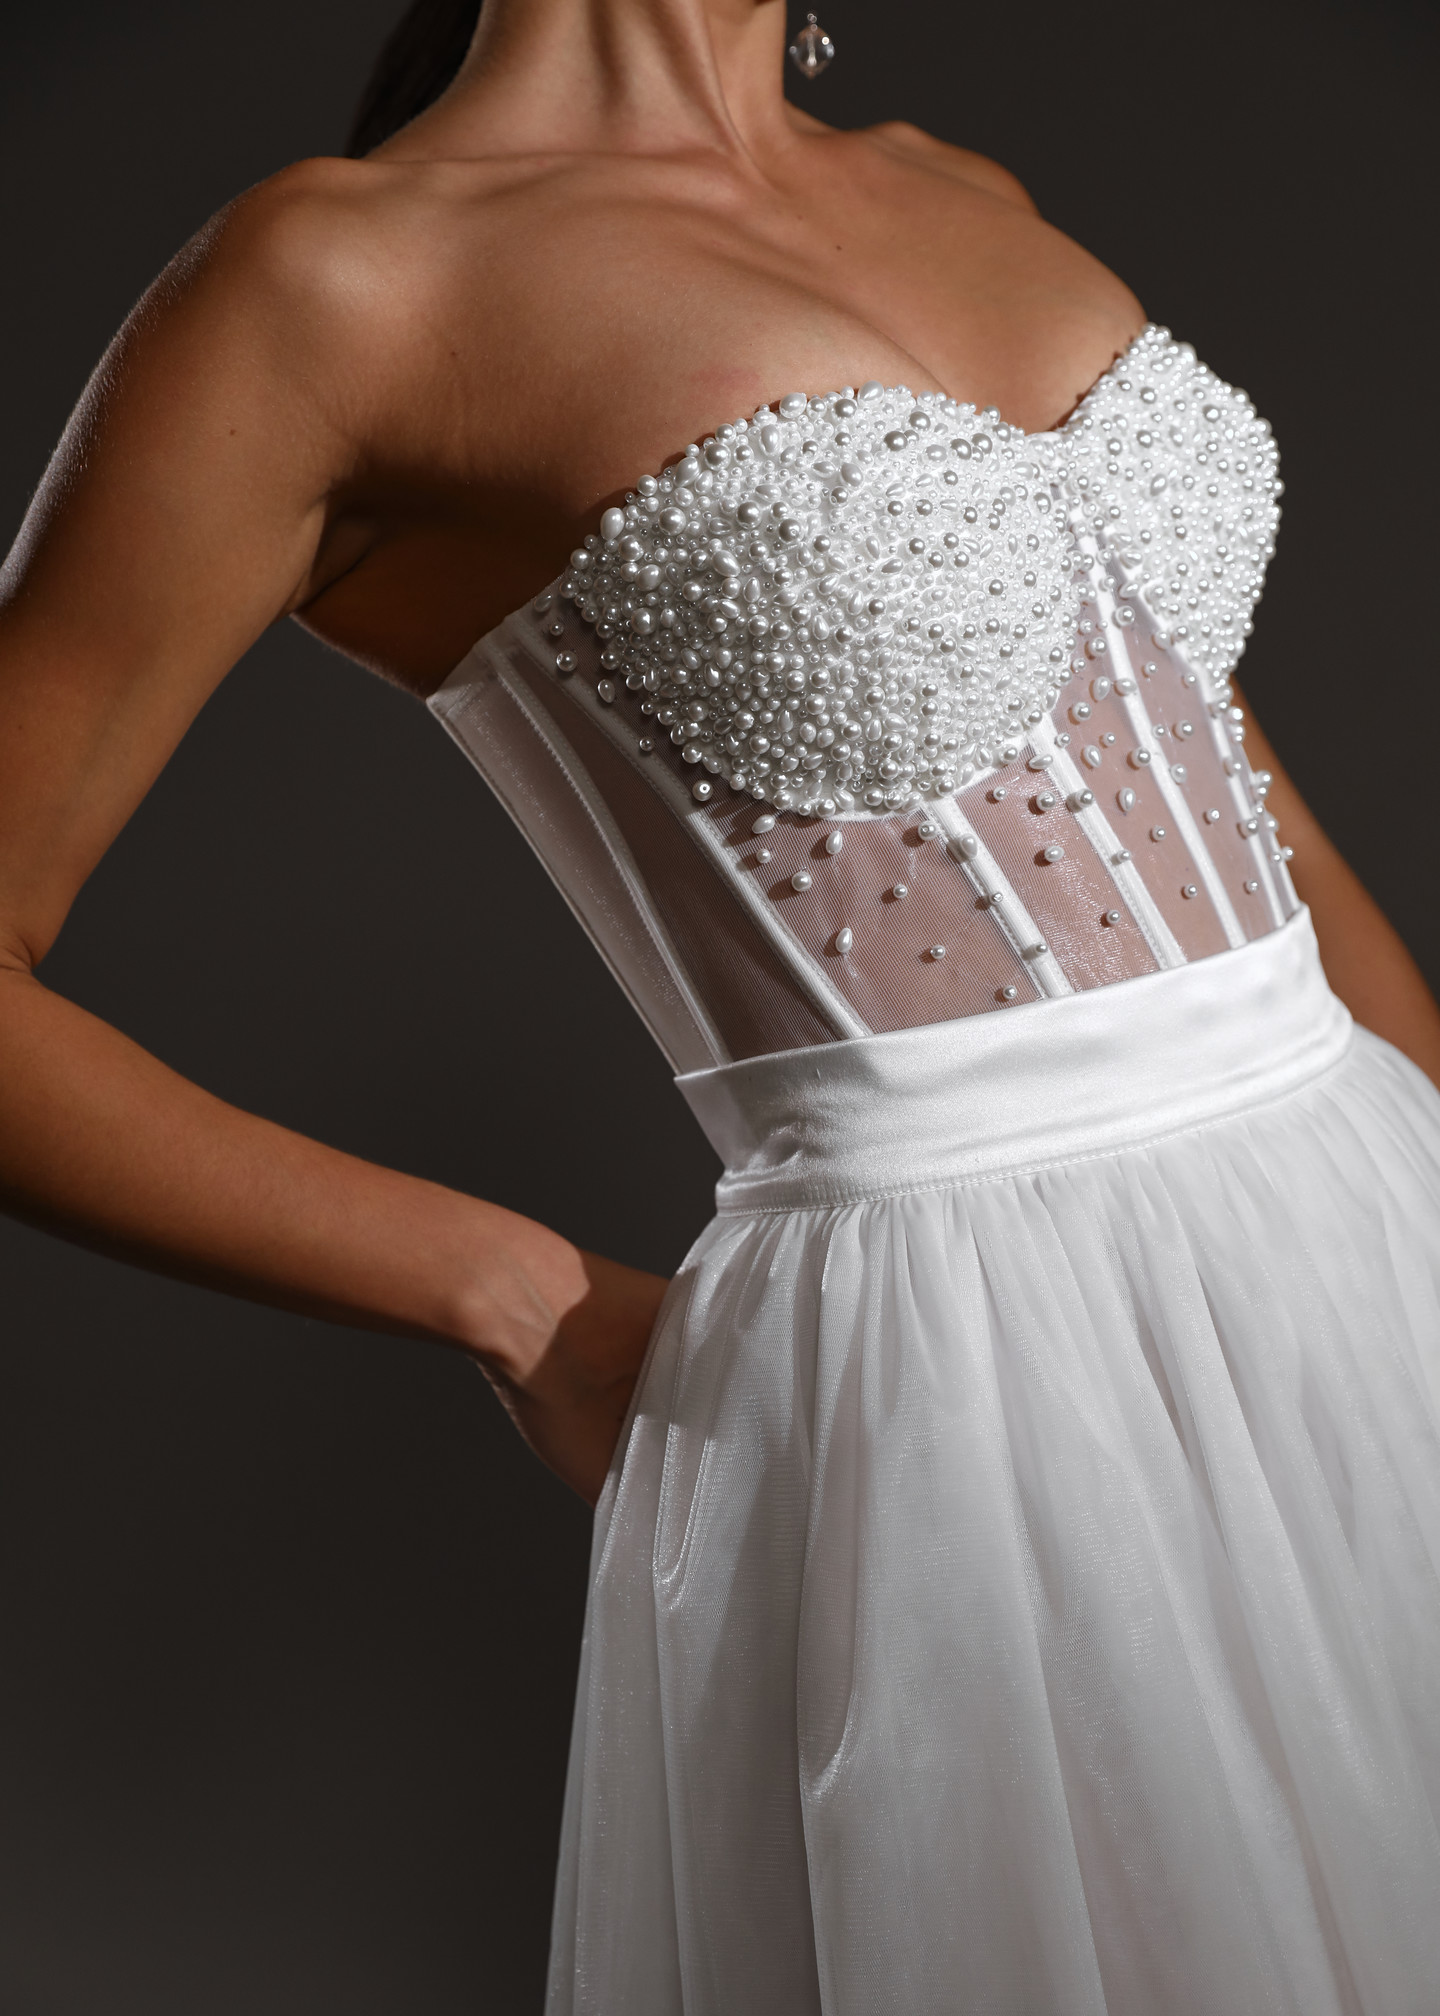 Beaded bustier, 2021, couture, top, bridal, off-white, bridal corset and skirt #2, embroidery, corset, popular